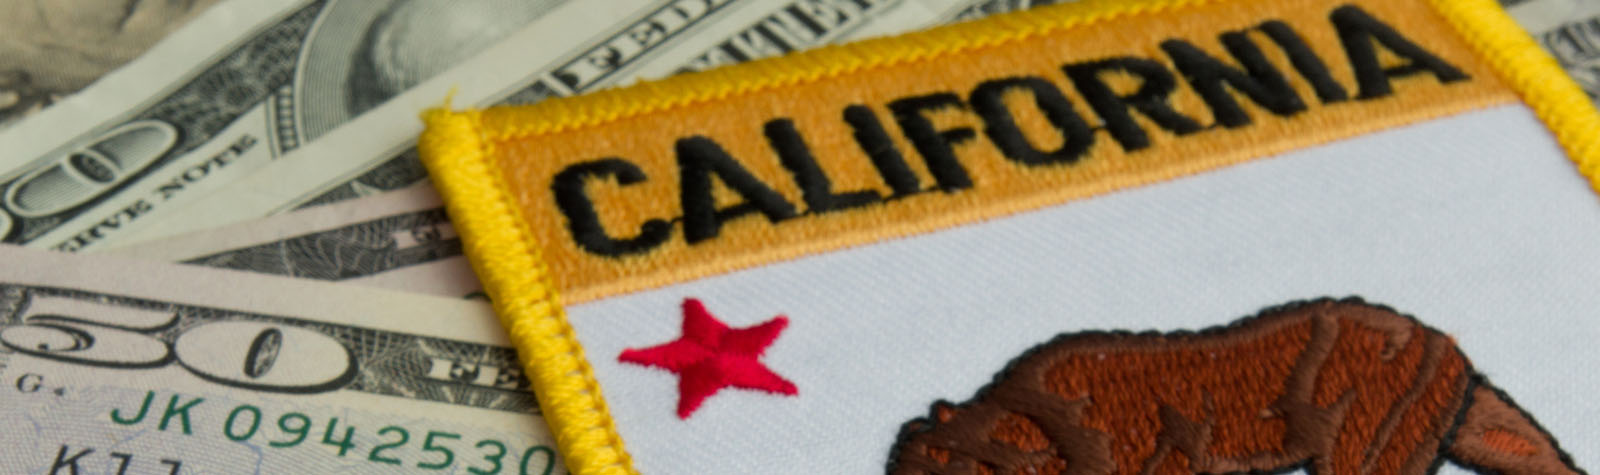 Update on California Competes Credit Application Periods for Fiscal Year 2019-2020